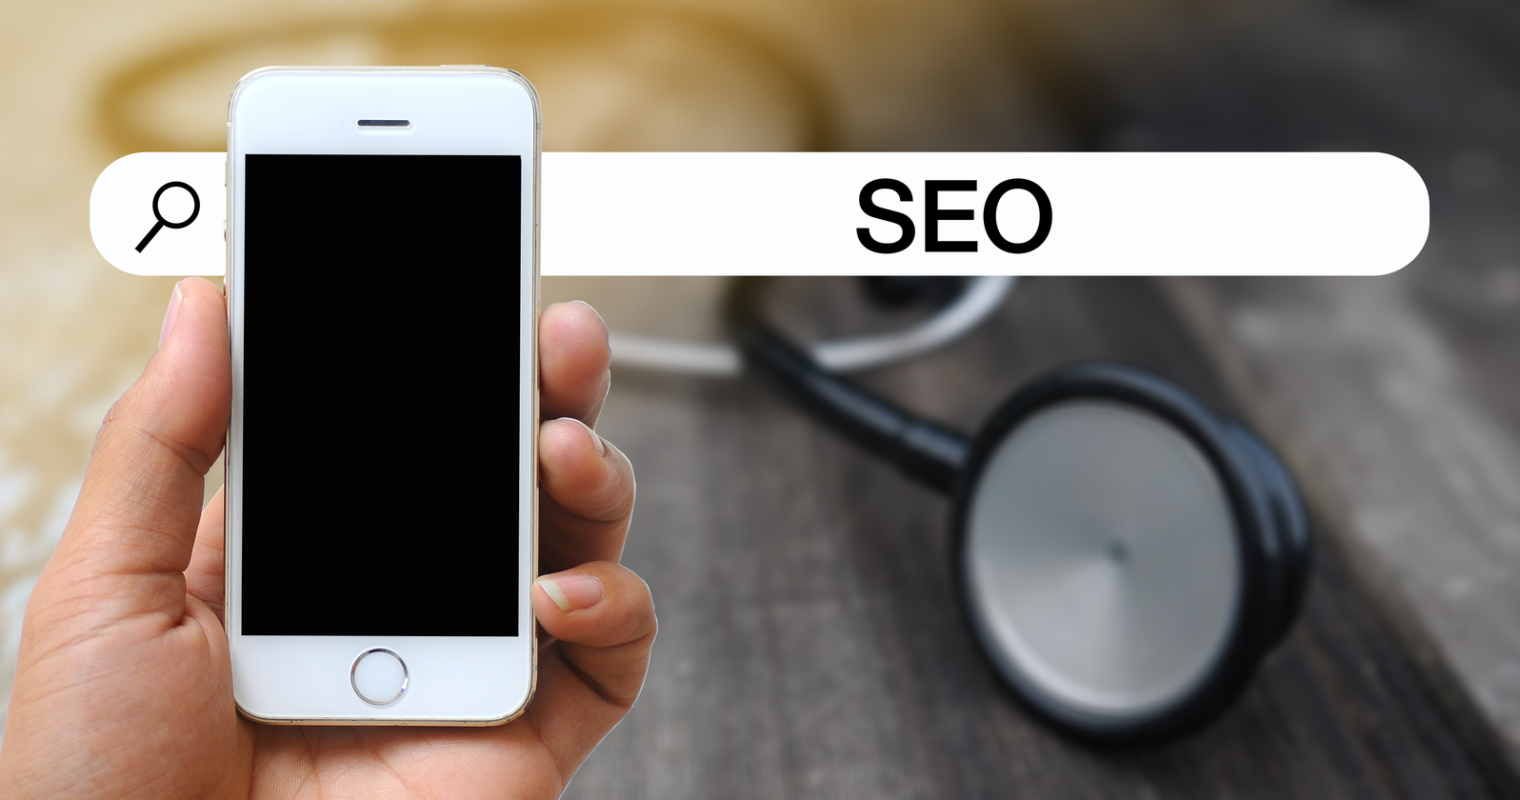 Healthcare SEO Fundamentals to Grow Your Medical Practice